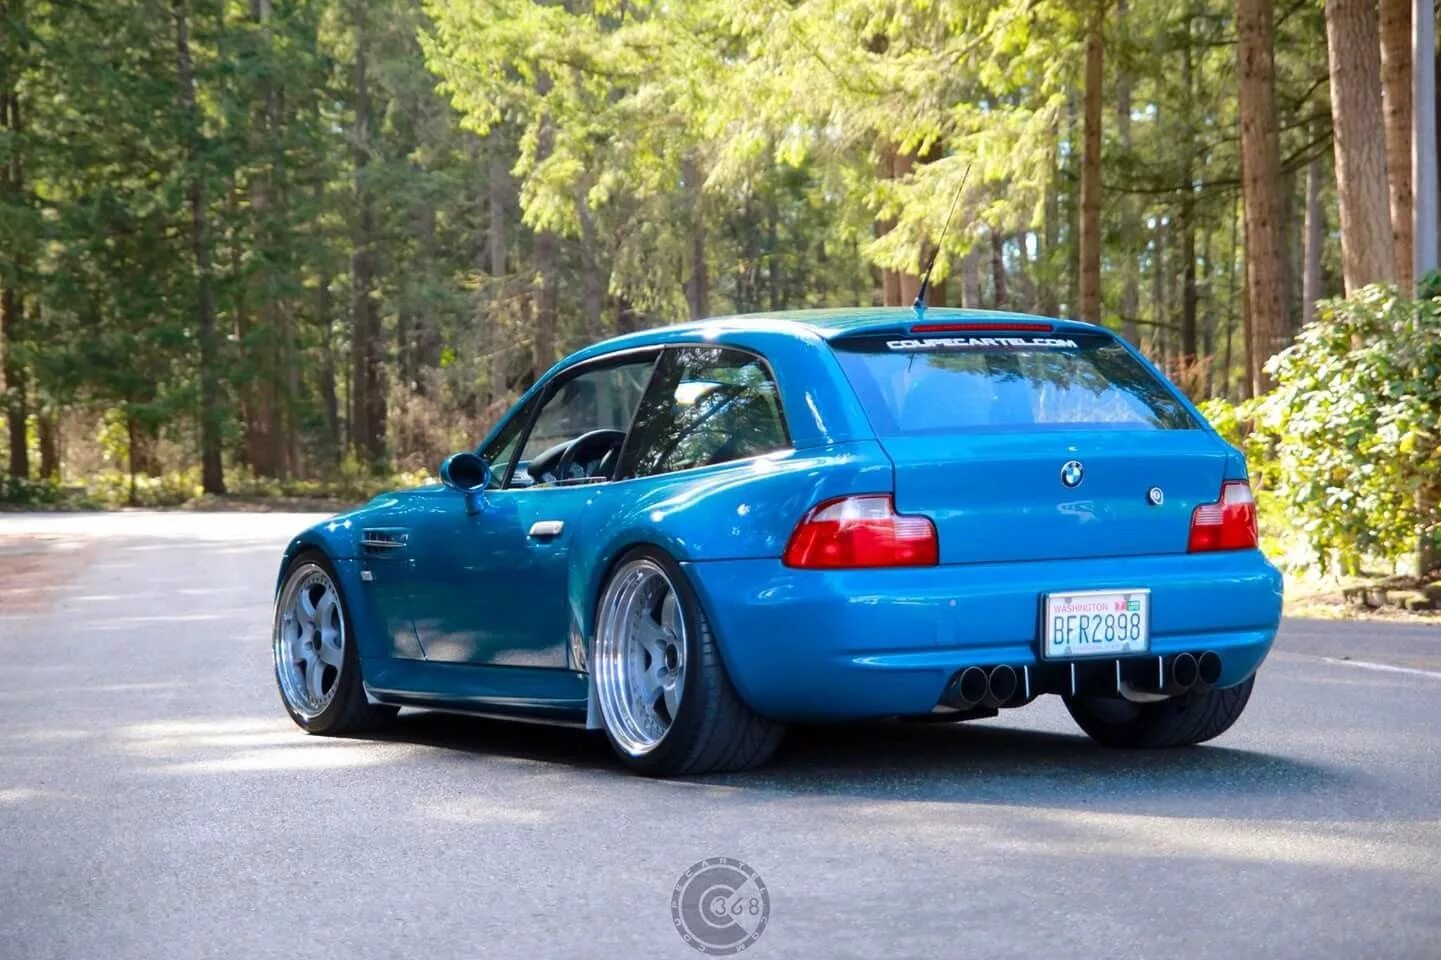 Z3m. BMW z3m. BMW z3 m Coupe. 2002 BMW z3 m Coupe. BMW z3 m Coupe 2001.